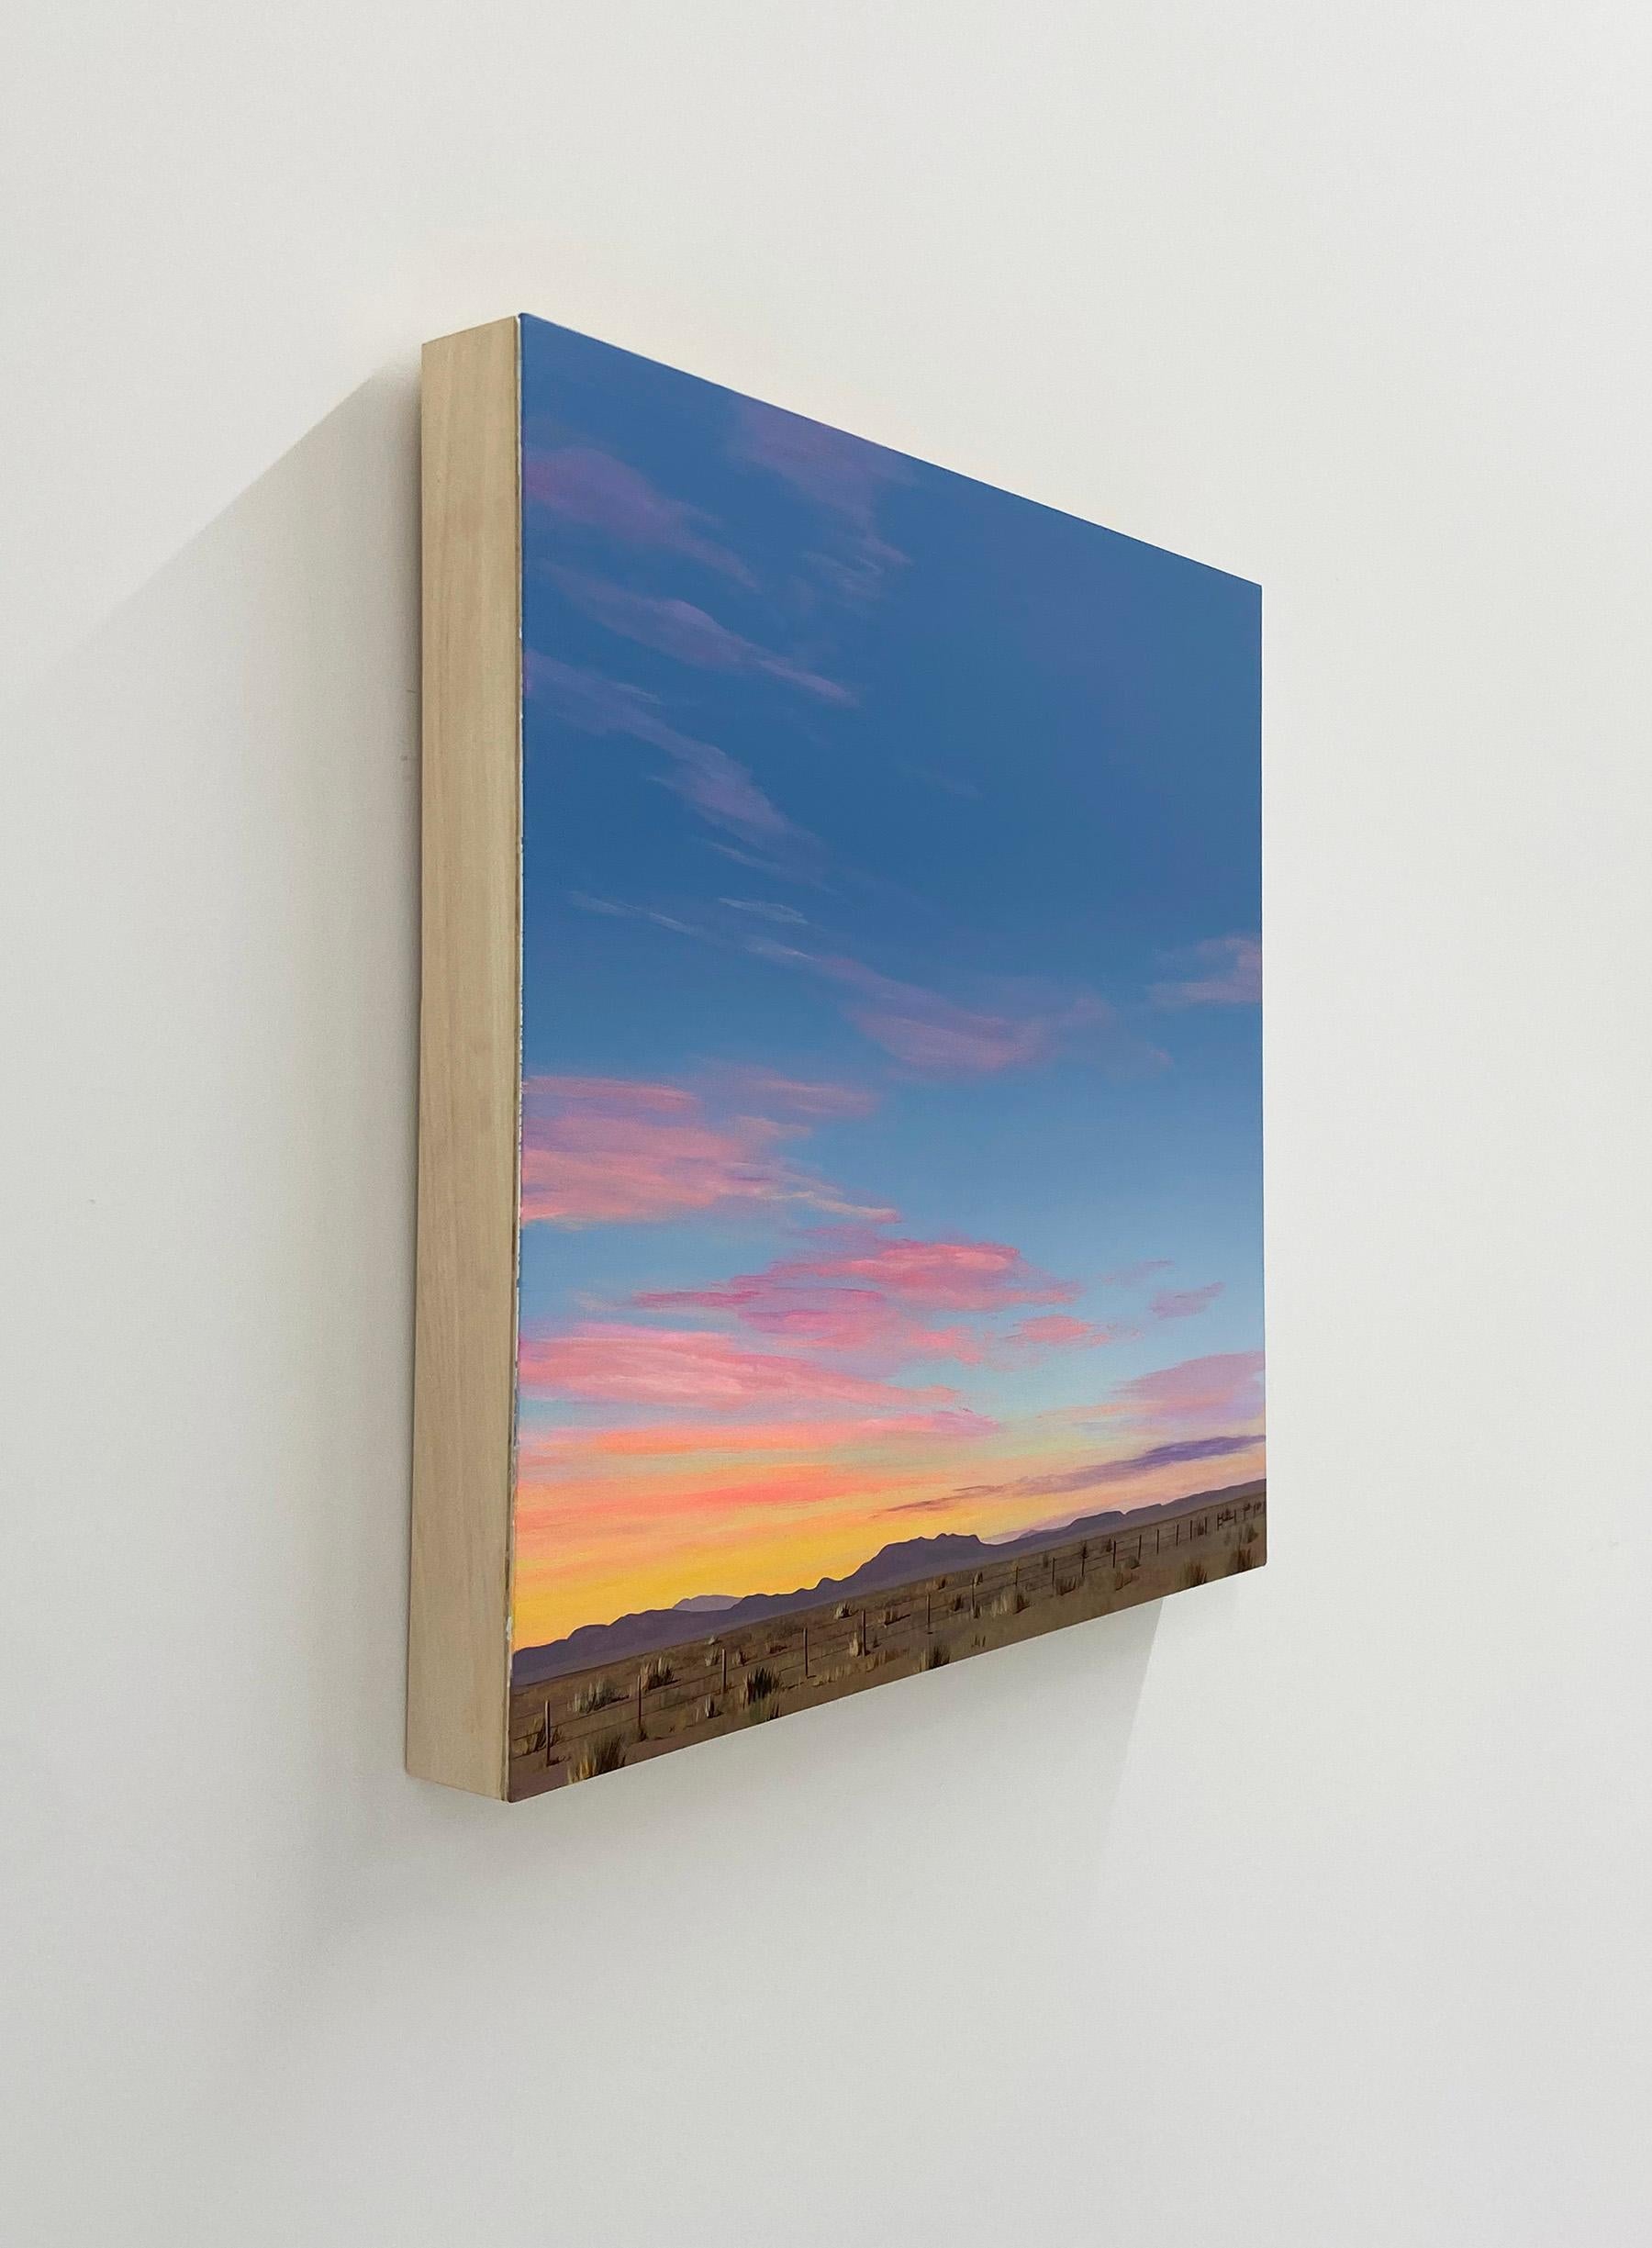 In this new series of paintings, Moore explores themes of wanderlust and memory. From glowing neon signage, to sprawling landscapes and unique architectural elements, this exhibition is a visual road trip from Los Angeles to Las Vegas. These